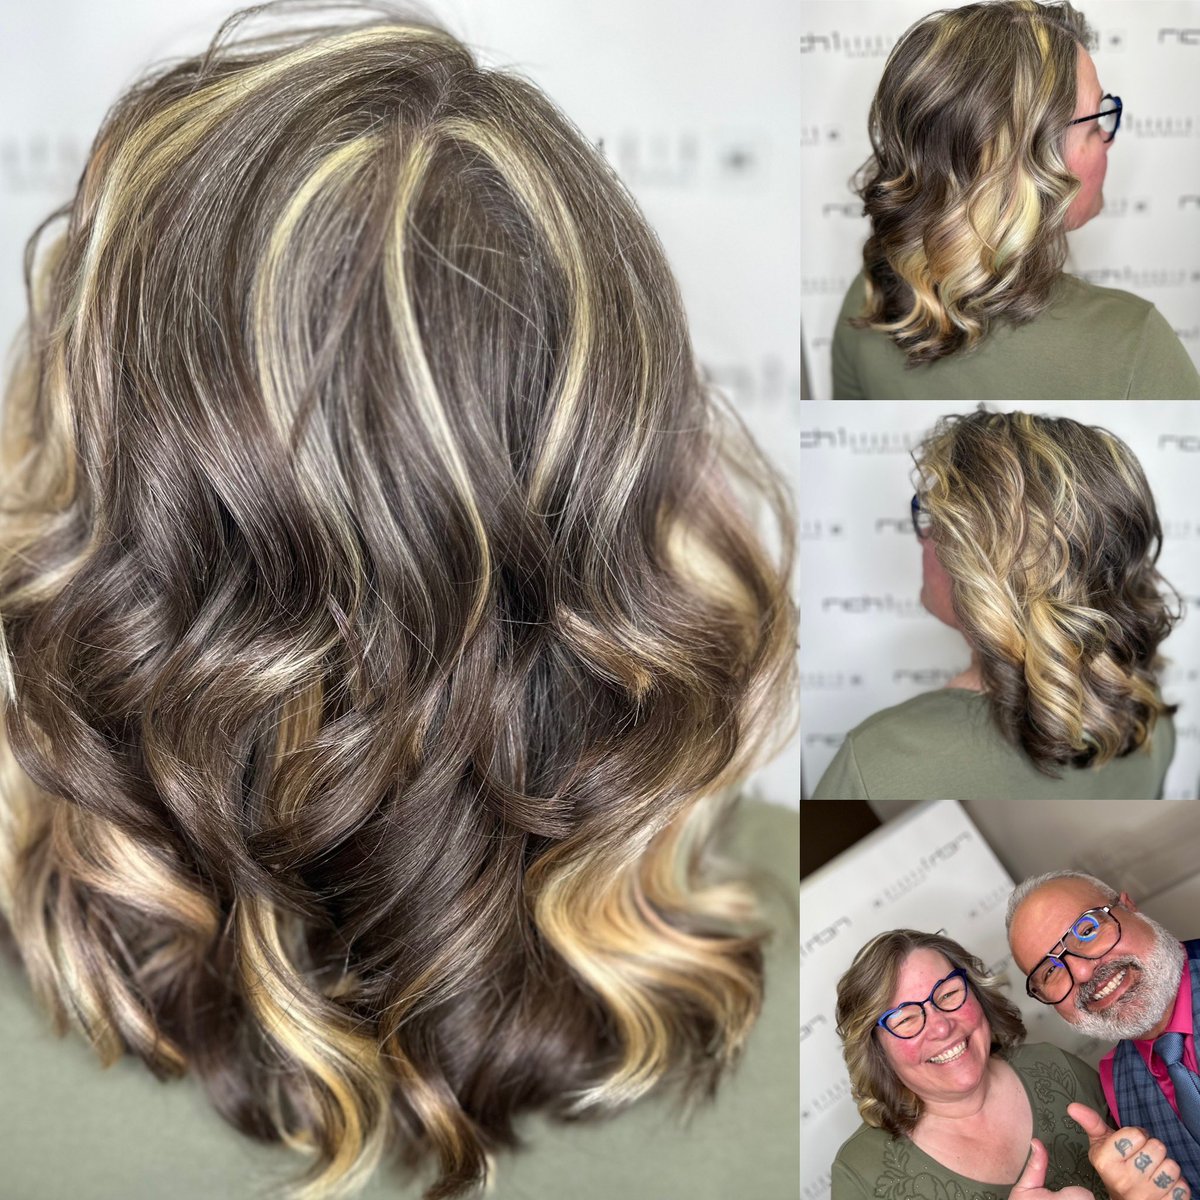 Always a pleasure and always fun! We’re just paving the way for some fun colours later.  Ty AF 
#hair #rich1beauty #lowlights #nanaimo #ladysmith #parksville #beauty #haircolour #haircut #caphighlights#popxg #matrix #matrixsocolor #matrixsocolorcult #pravana #wellablondor